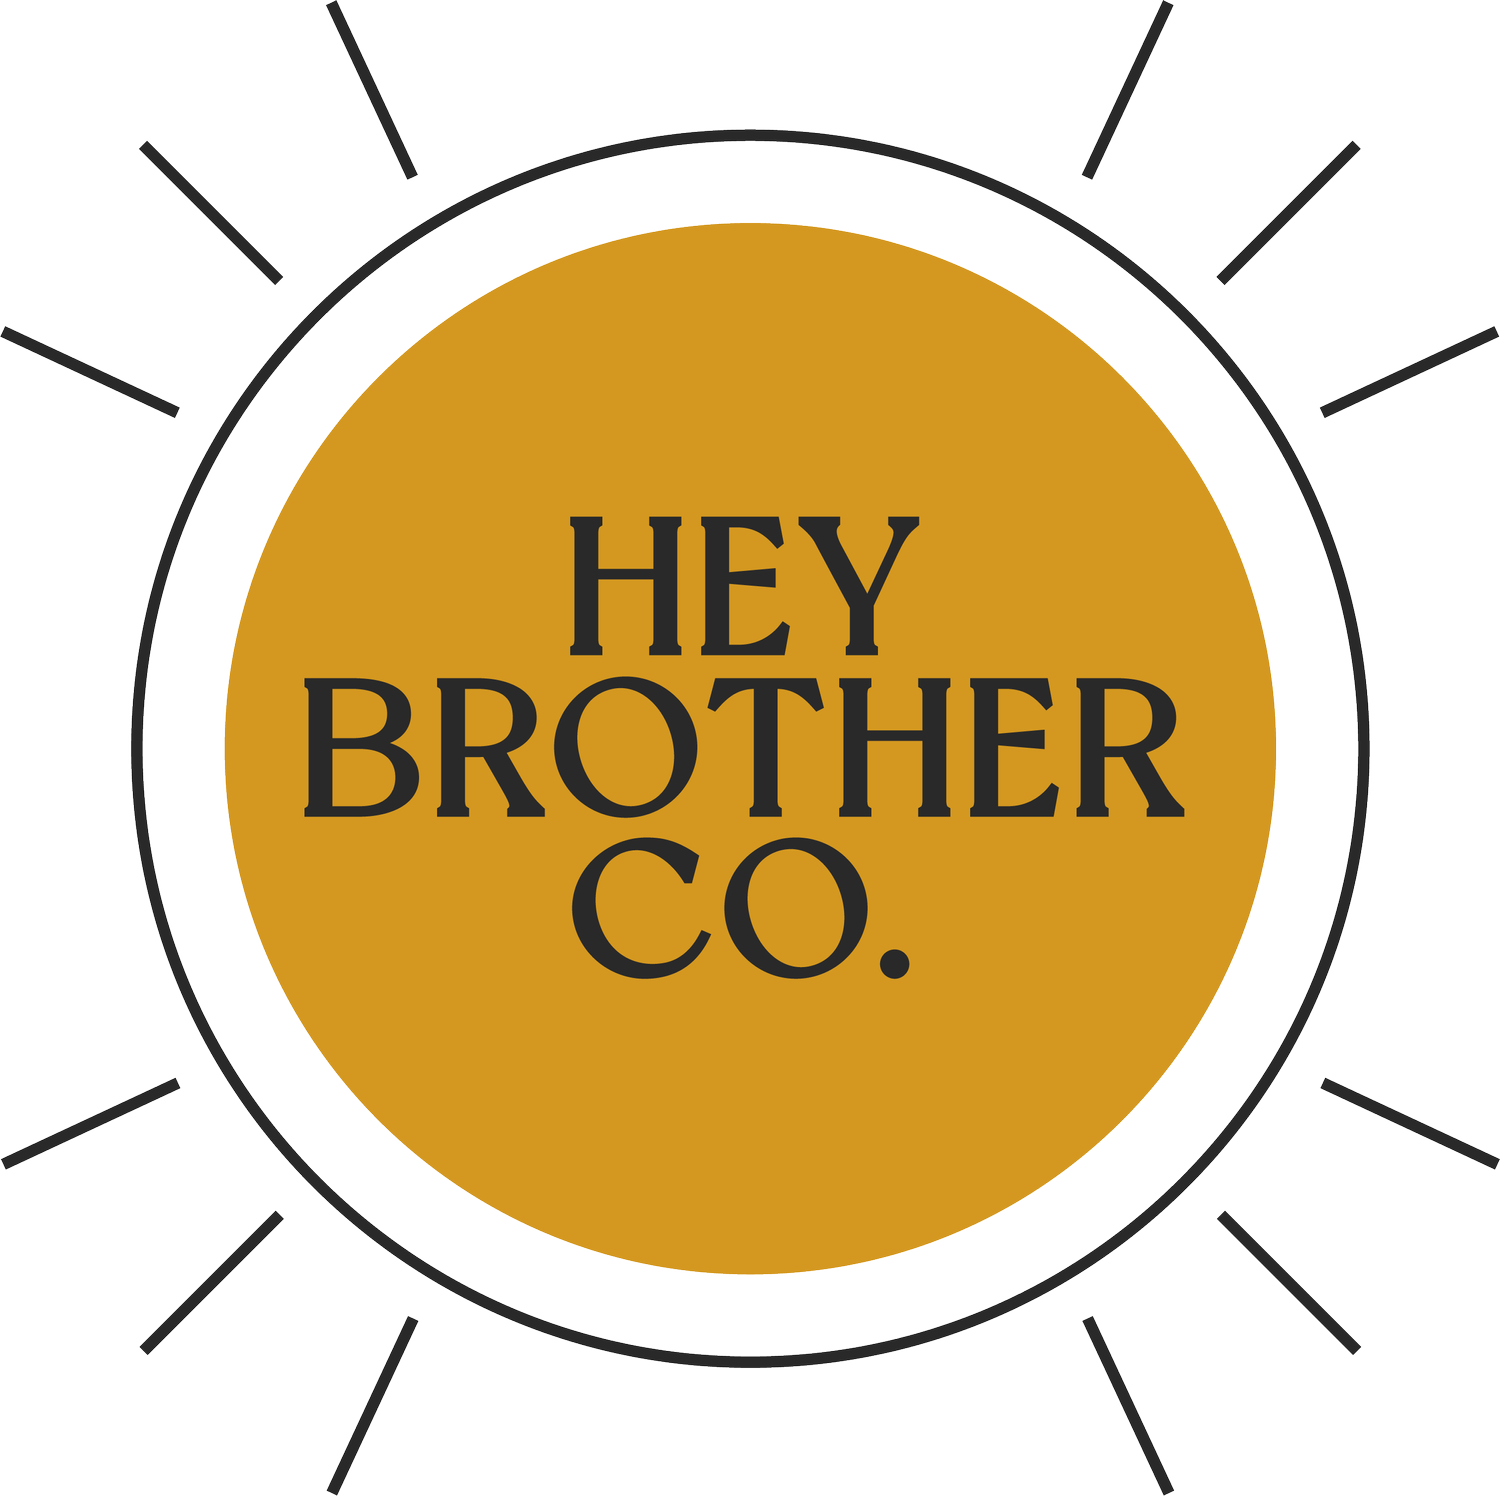 Hey Brother Co.